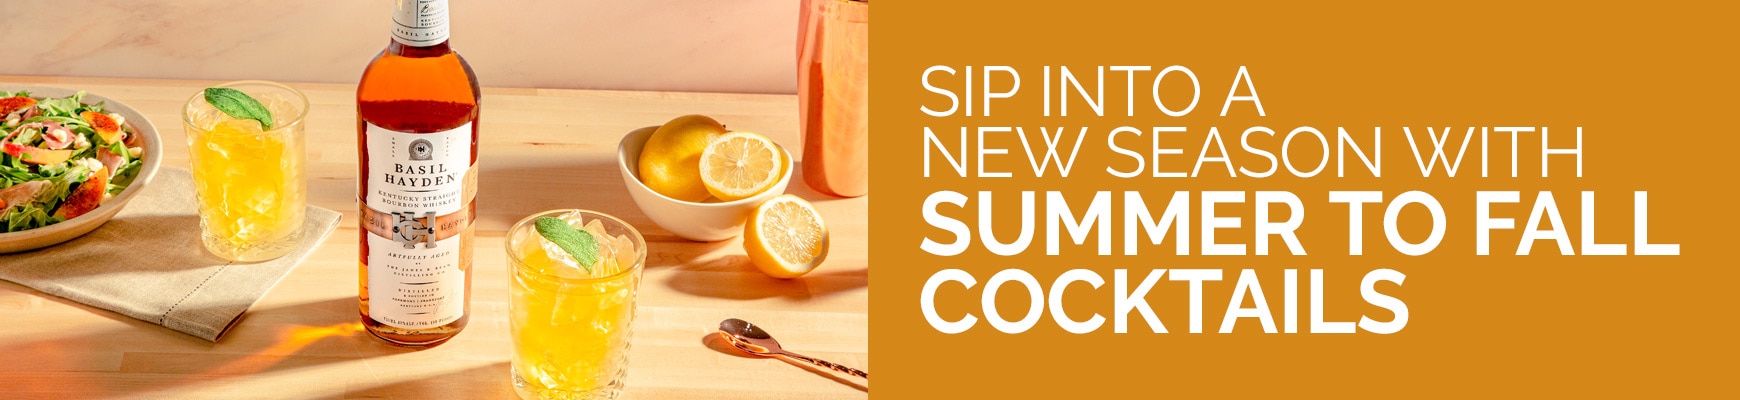 Sip Into a New Season with Summer to Fall Cocktails